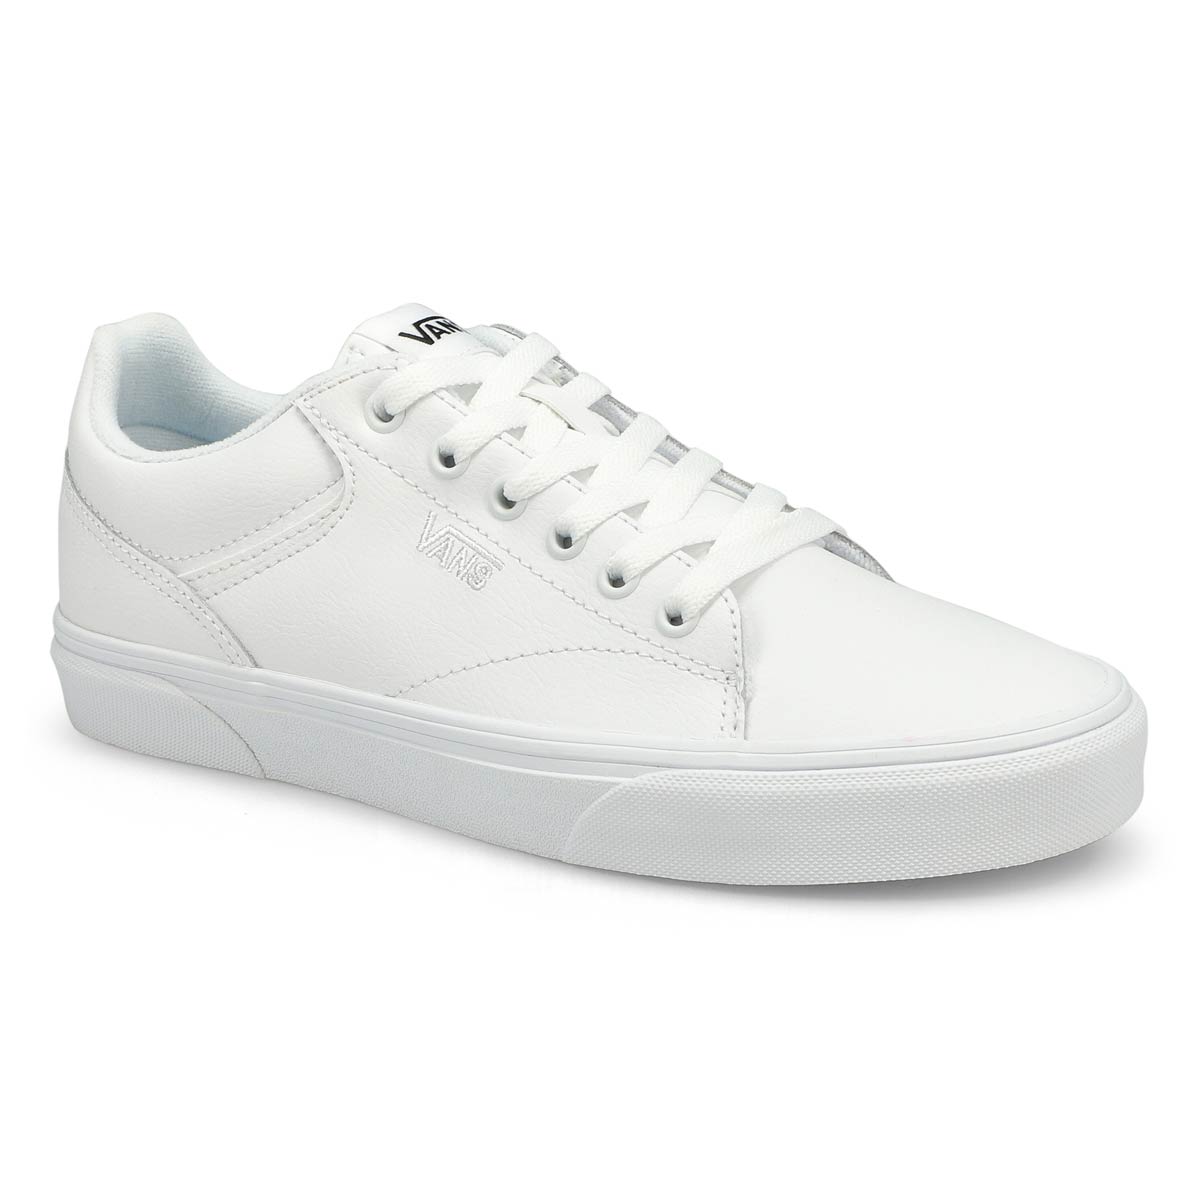 white leather lace up sneakers women's